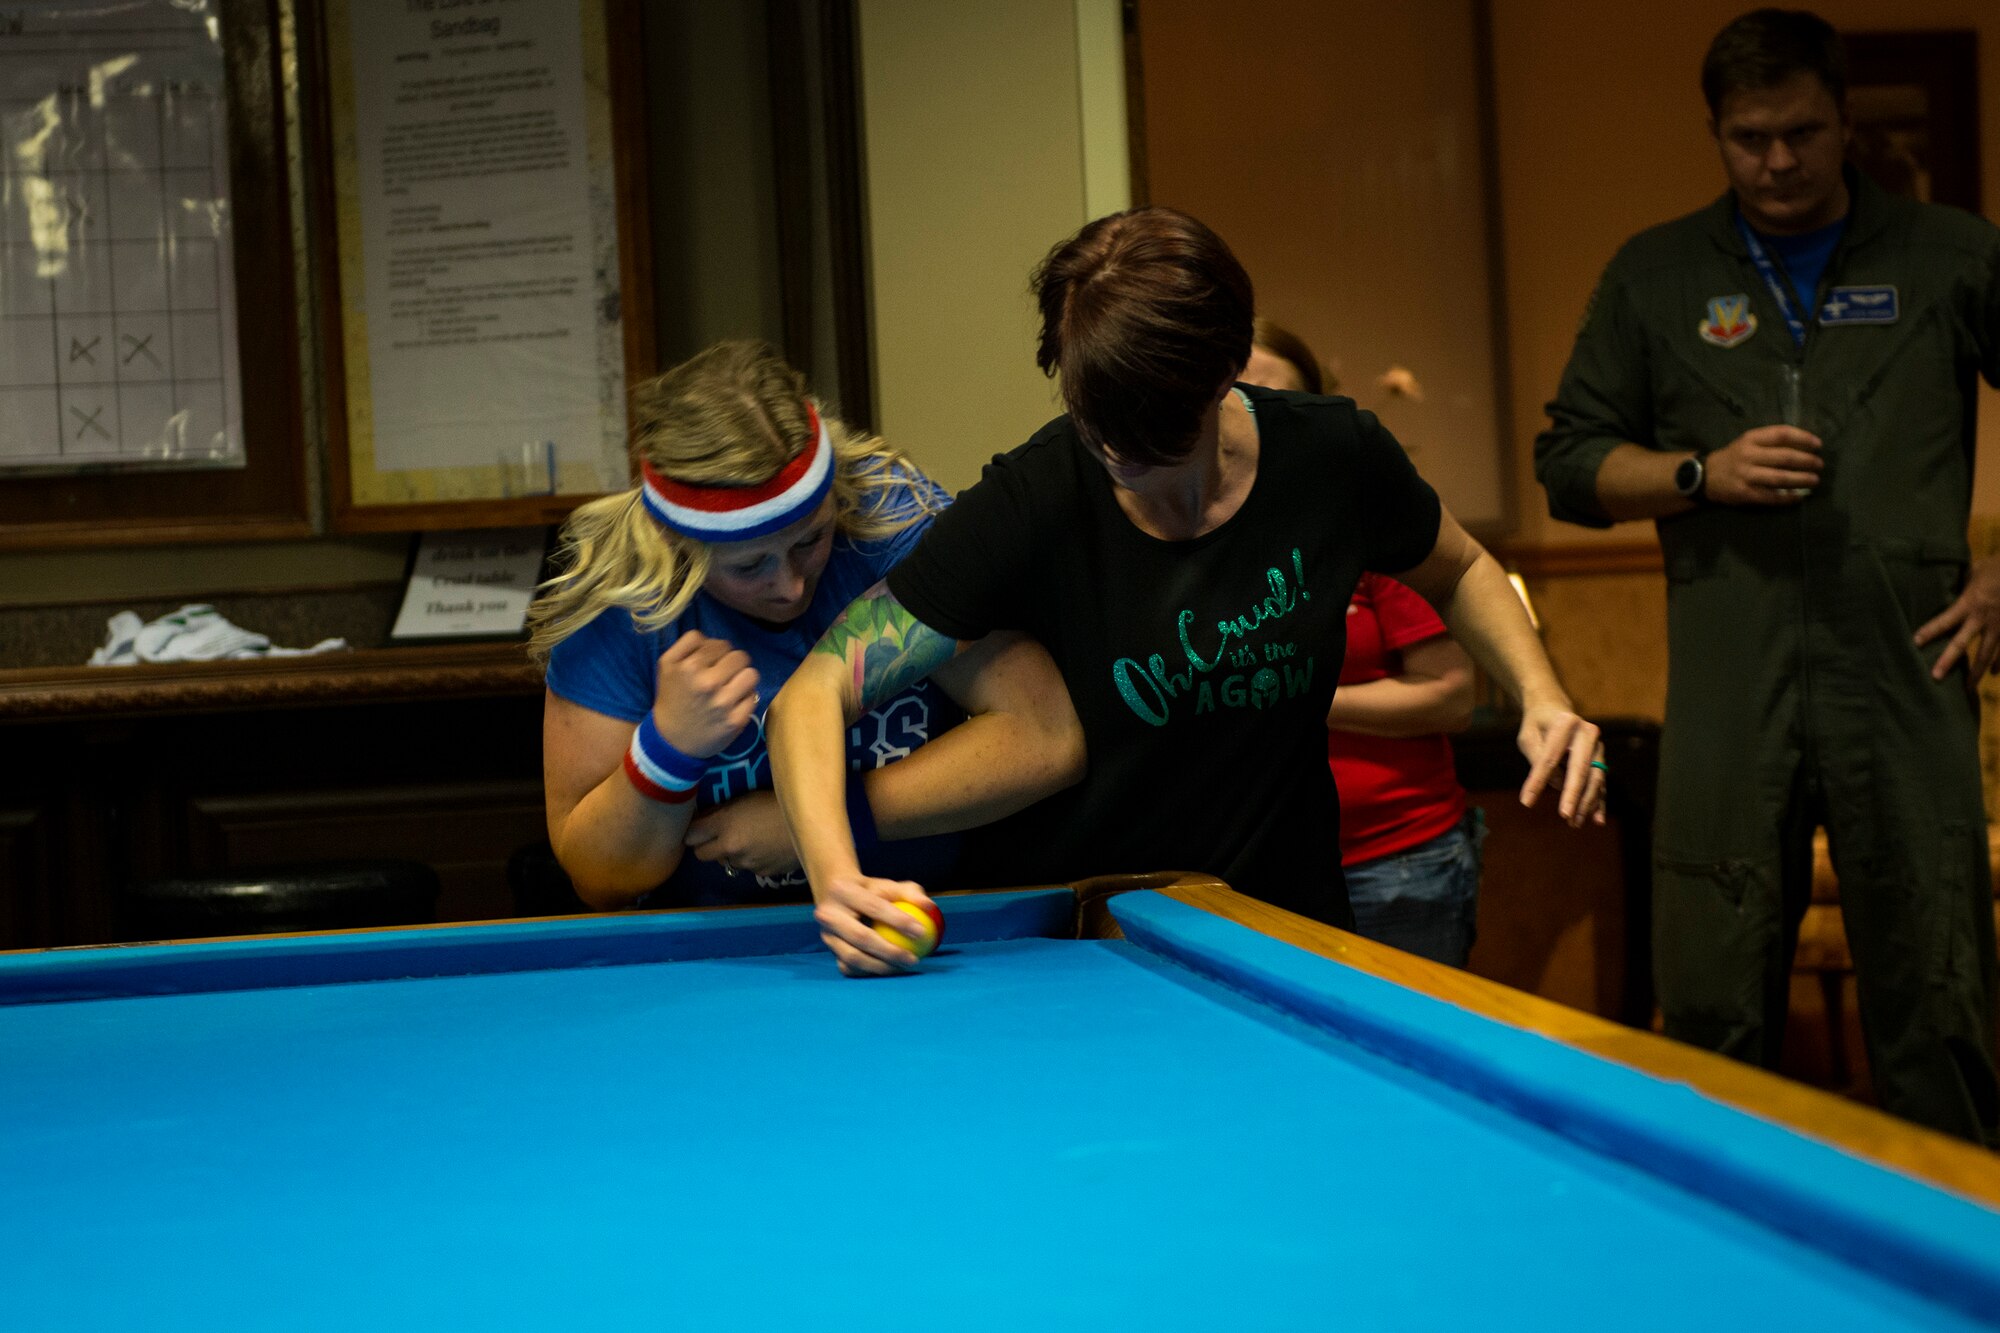 Terri Beaudrie, right, and Jessica Seyfried, crud players, engage each other during a spouses crud tourney, April 27, 2018, at Moody Air Force Base, Ga. The Moody spouses built the event around teamwork and comradery, giving them an opportunity to experience a long-held tradition amongst the Air Force fighter and rescue squadrons. Though the game originated in the Royal Canadian Air Force, it has since been adopted by the U.S. (U.S. Air Force photo by Airman 1st Class Erick Requadt)